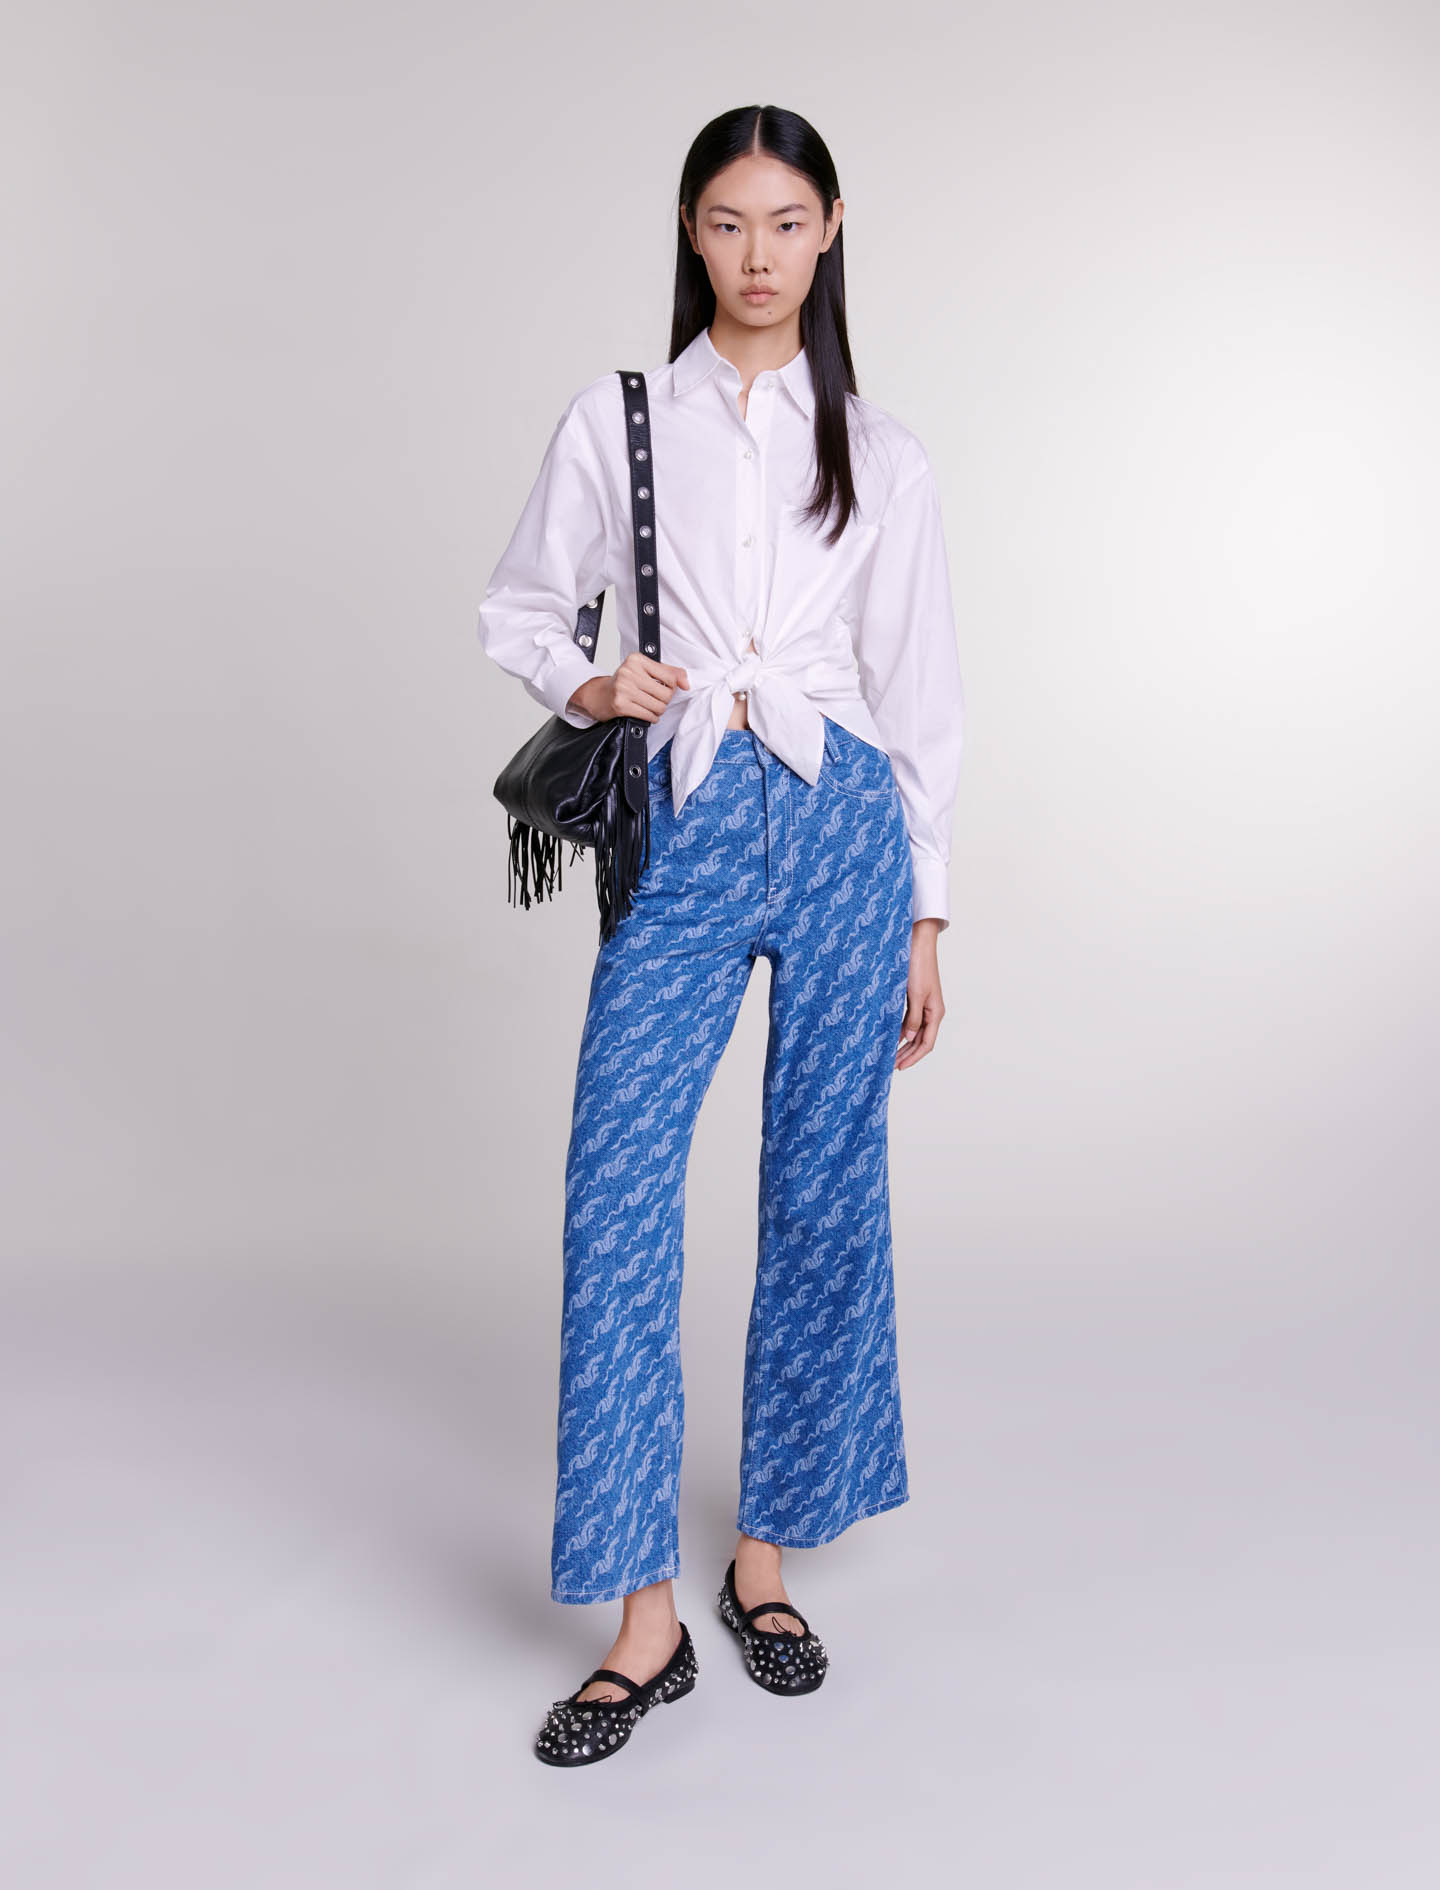 Maje Woman's cotton Pocket lining: Wide-leg patterned jeans for Spring/Summer, in color Blue / Blue